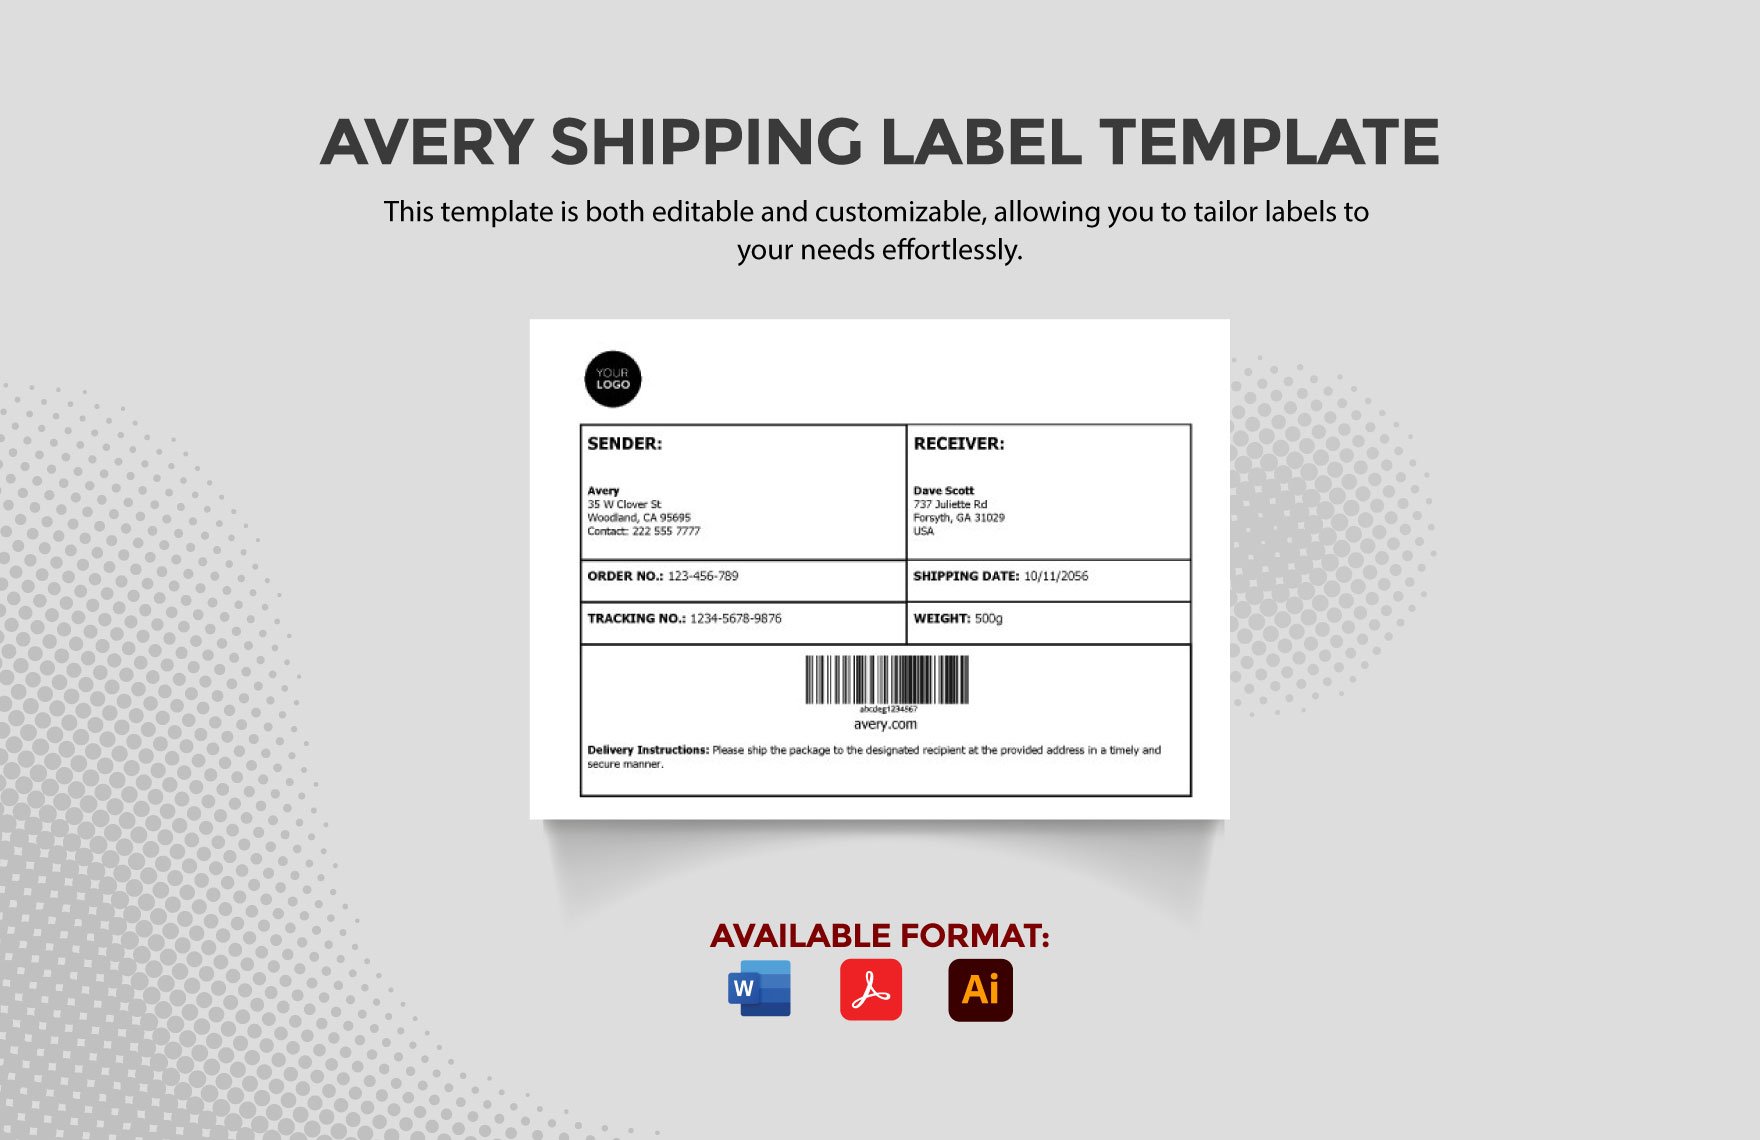 Avery Shipping Label Template